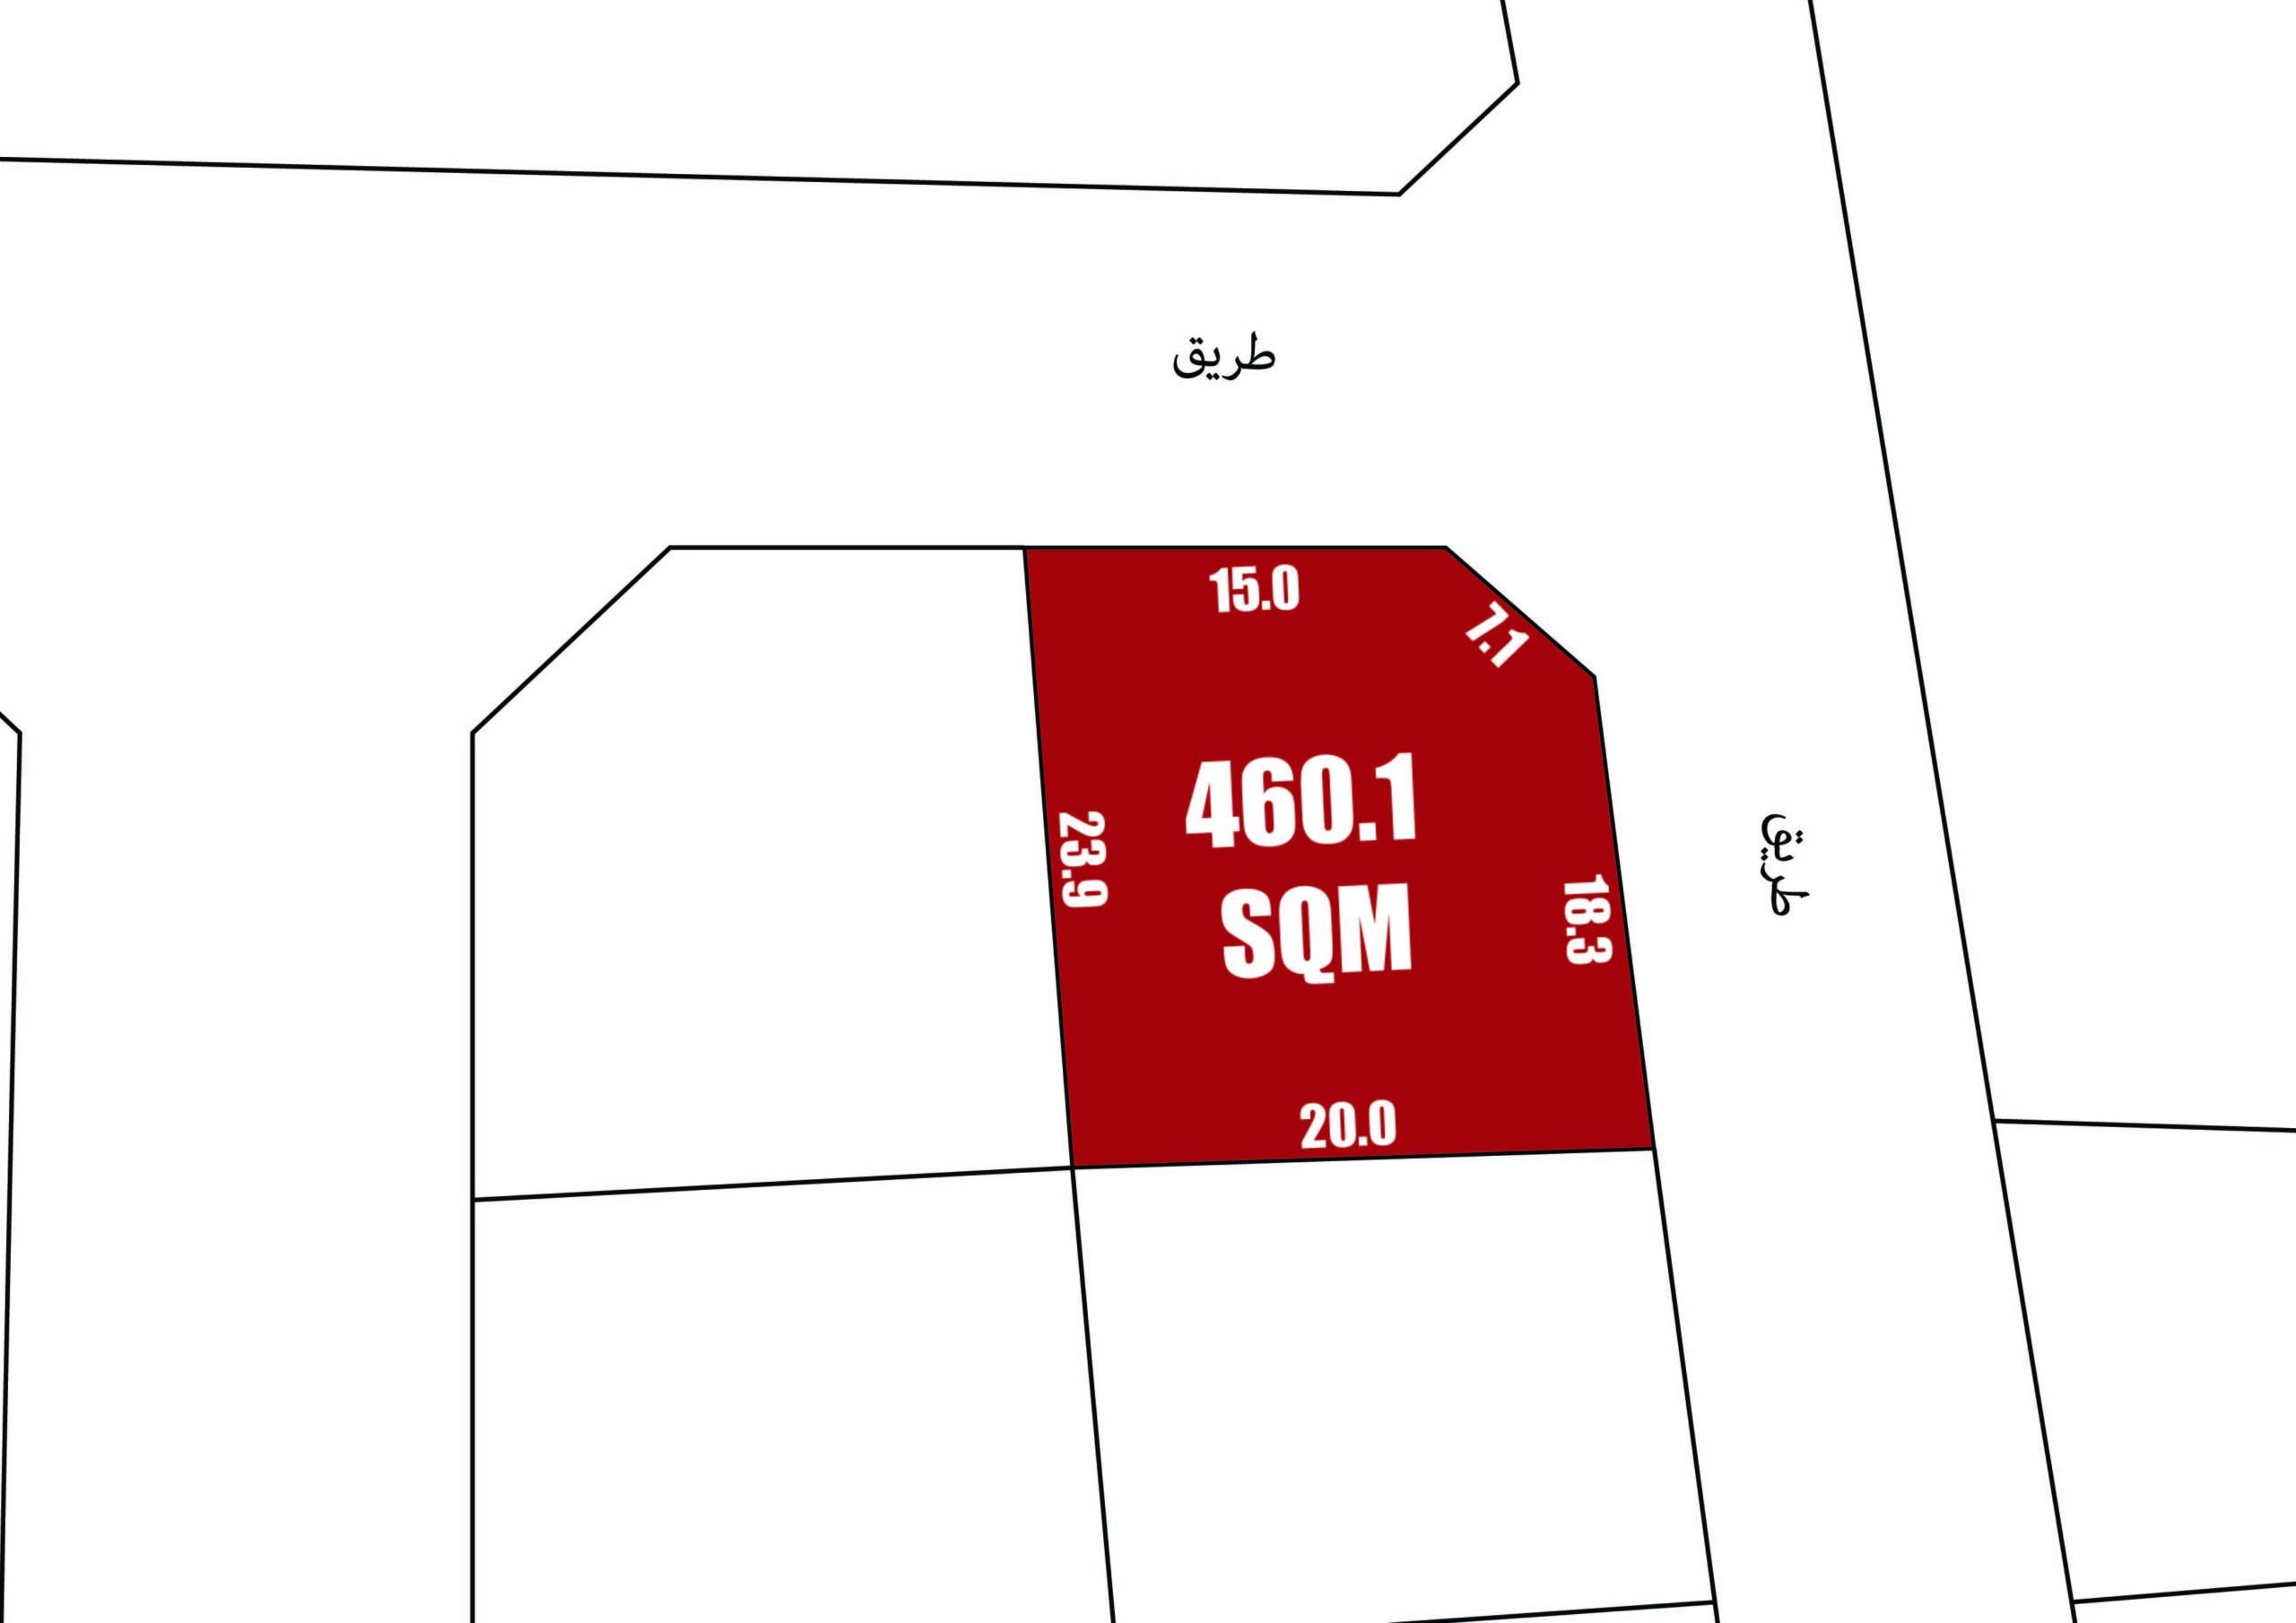 RB Land for Sale in Salmabad | 460.1 SQM